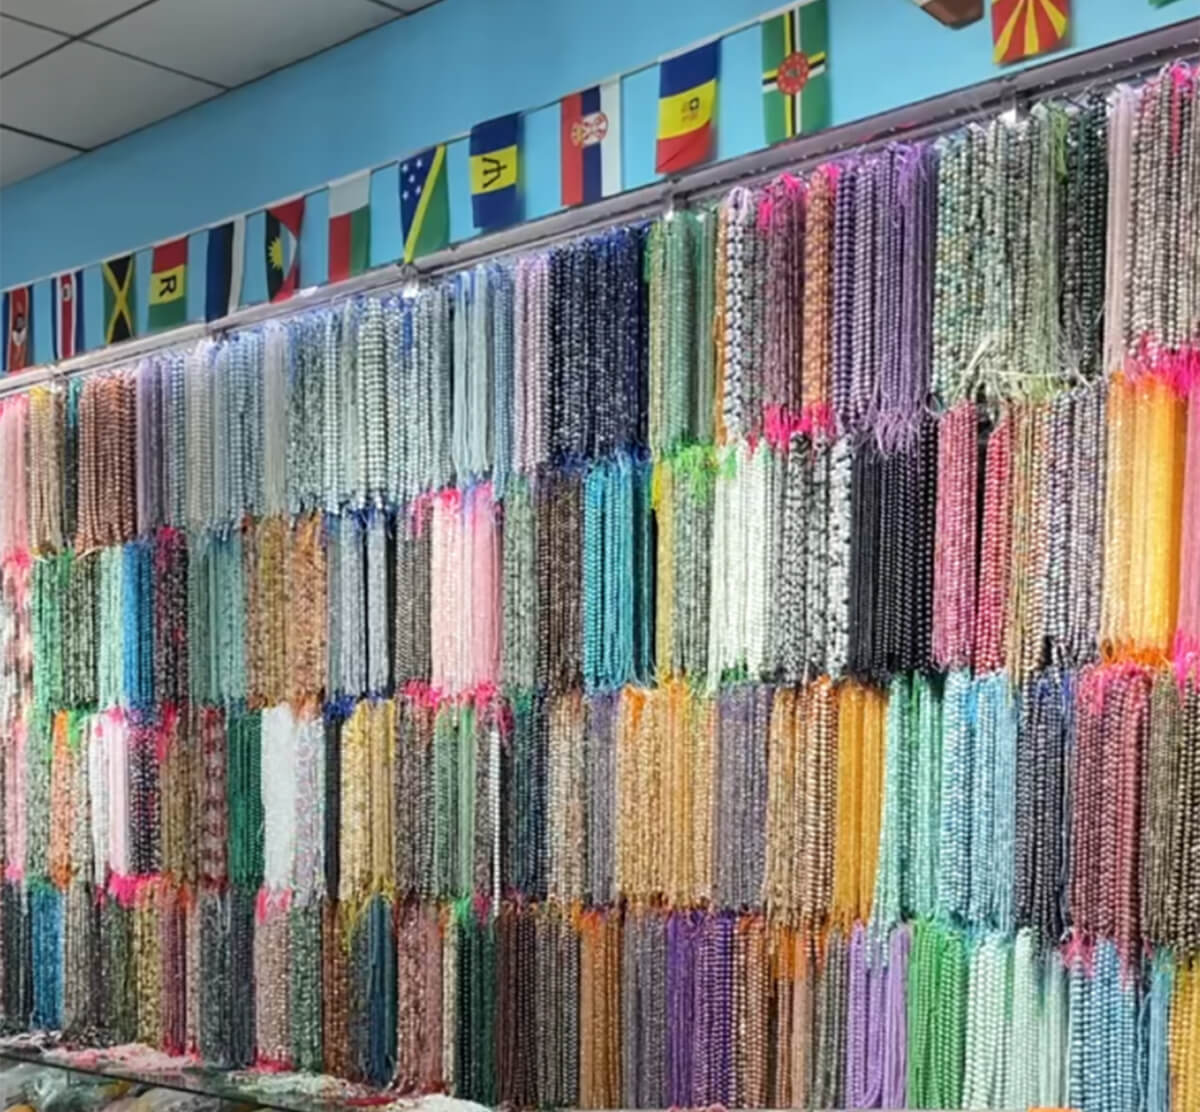 A beads booth in Yiwu Market